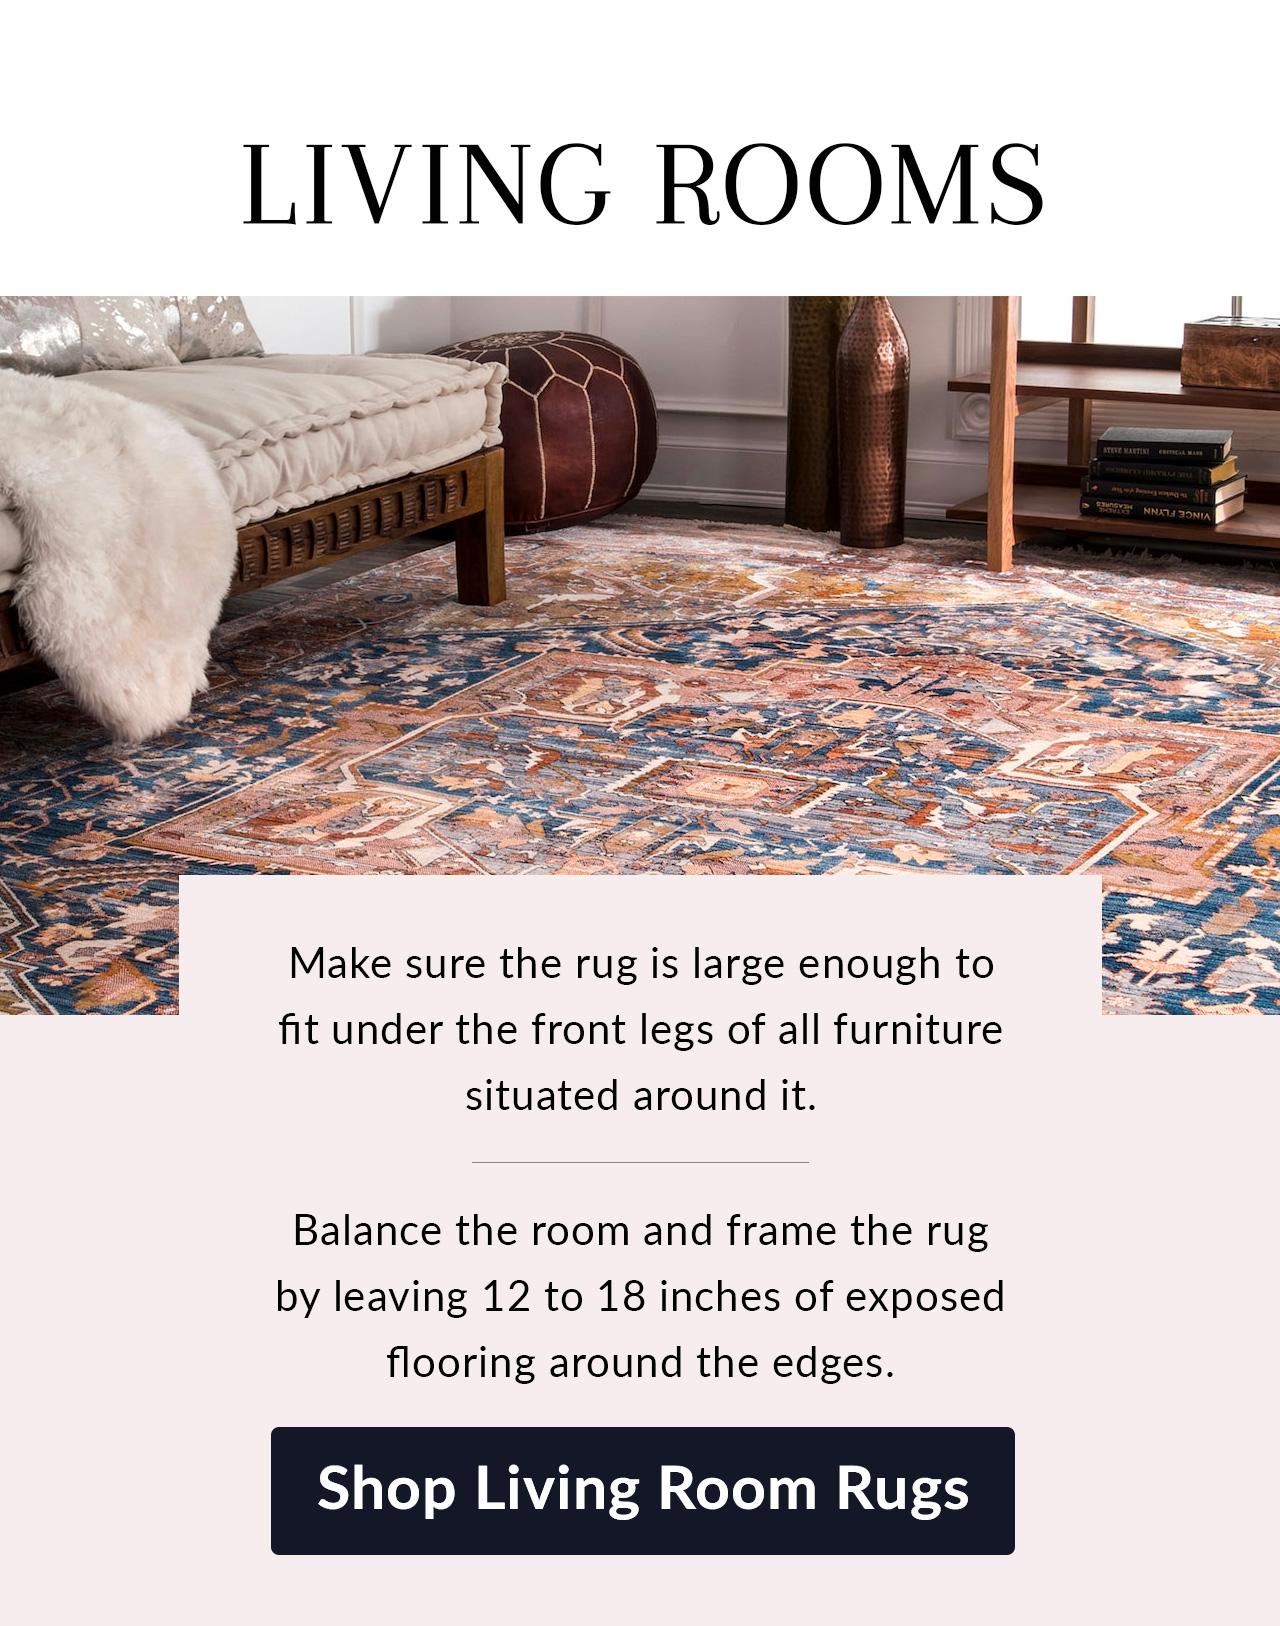 Living Rooms; 10% Off - Limited Time Only